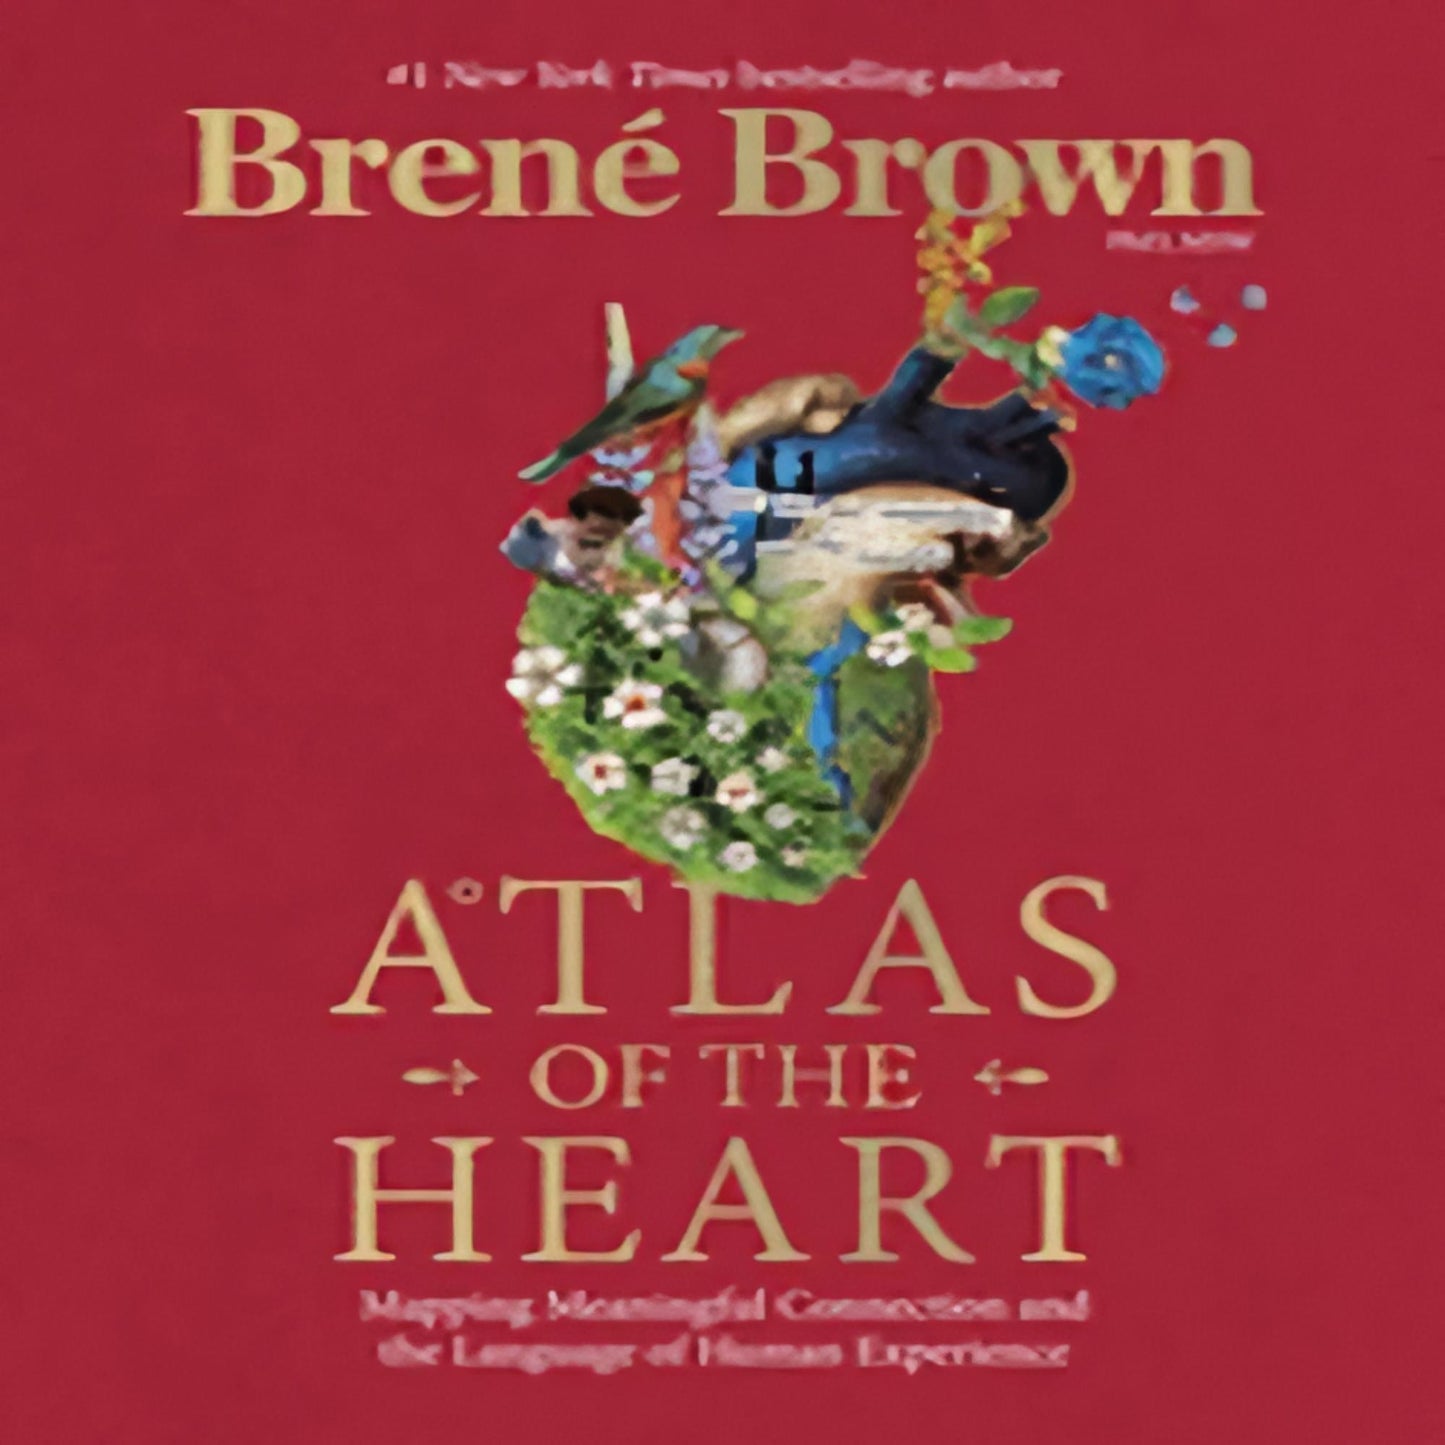 Atlas of the Heart: Mapping Meaningful Connection and the Language of Human Experience112-022123-0399592555DPGBOOKSTORE.COM. Today's Bestsellers.